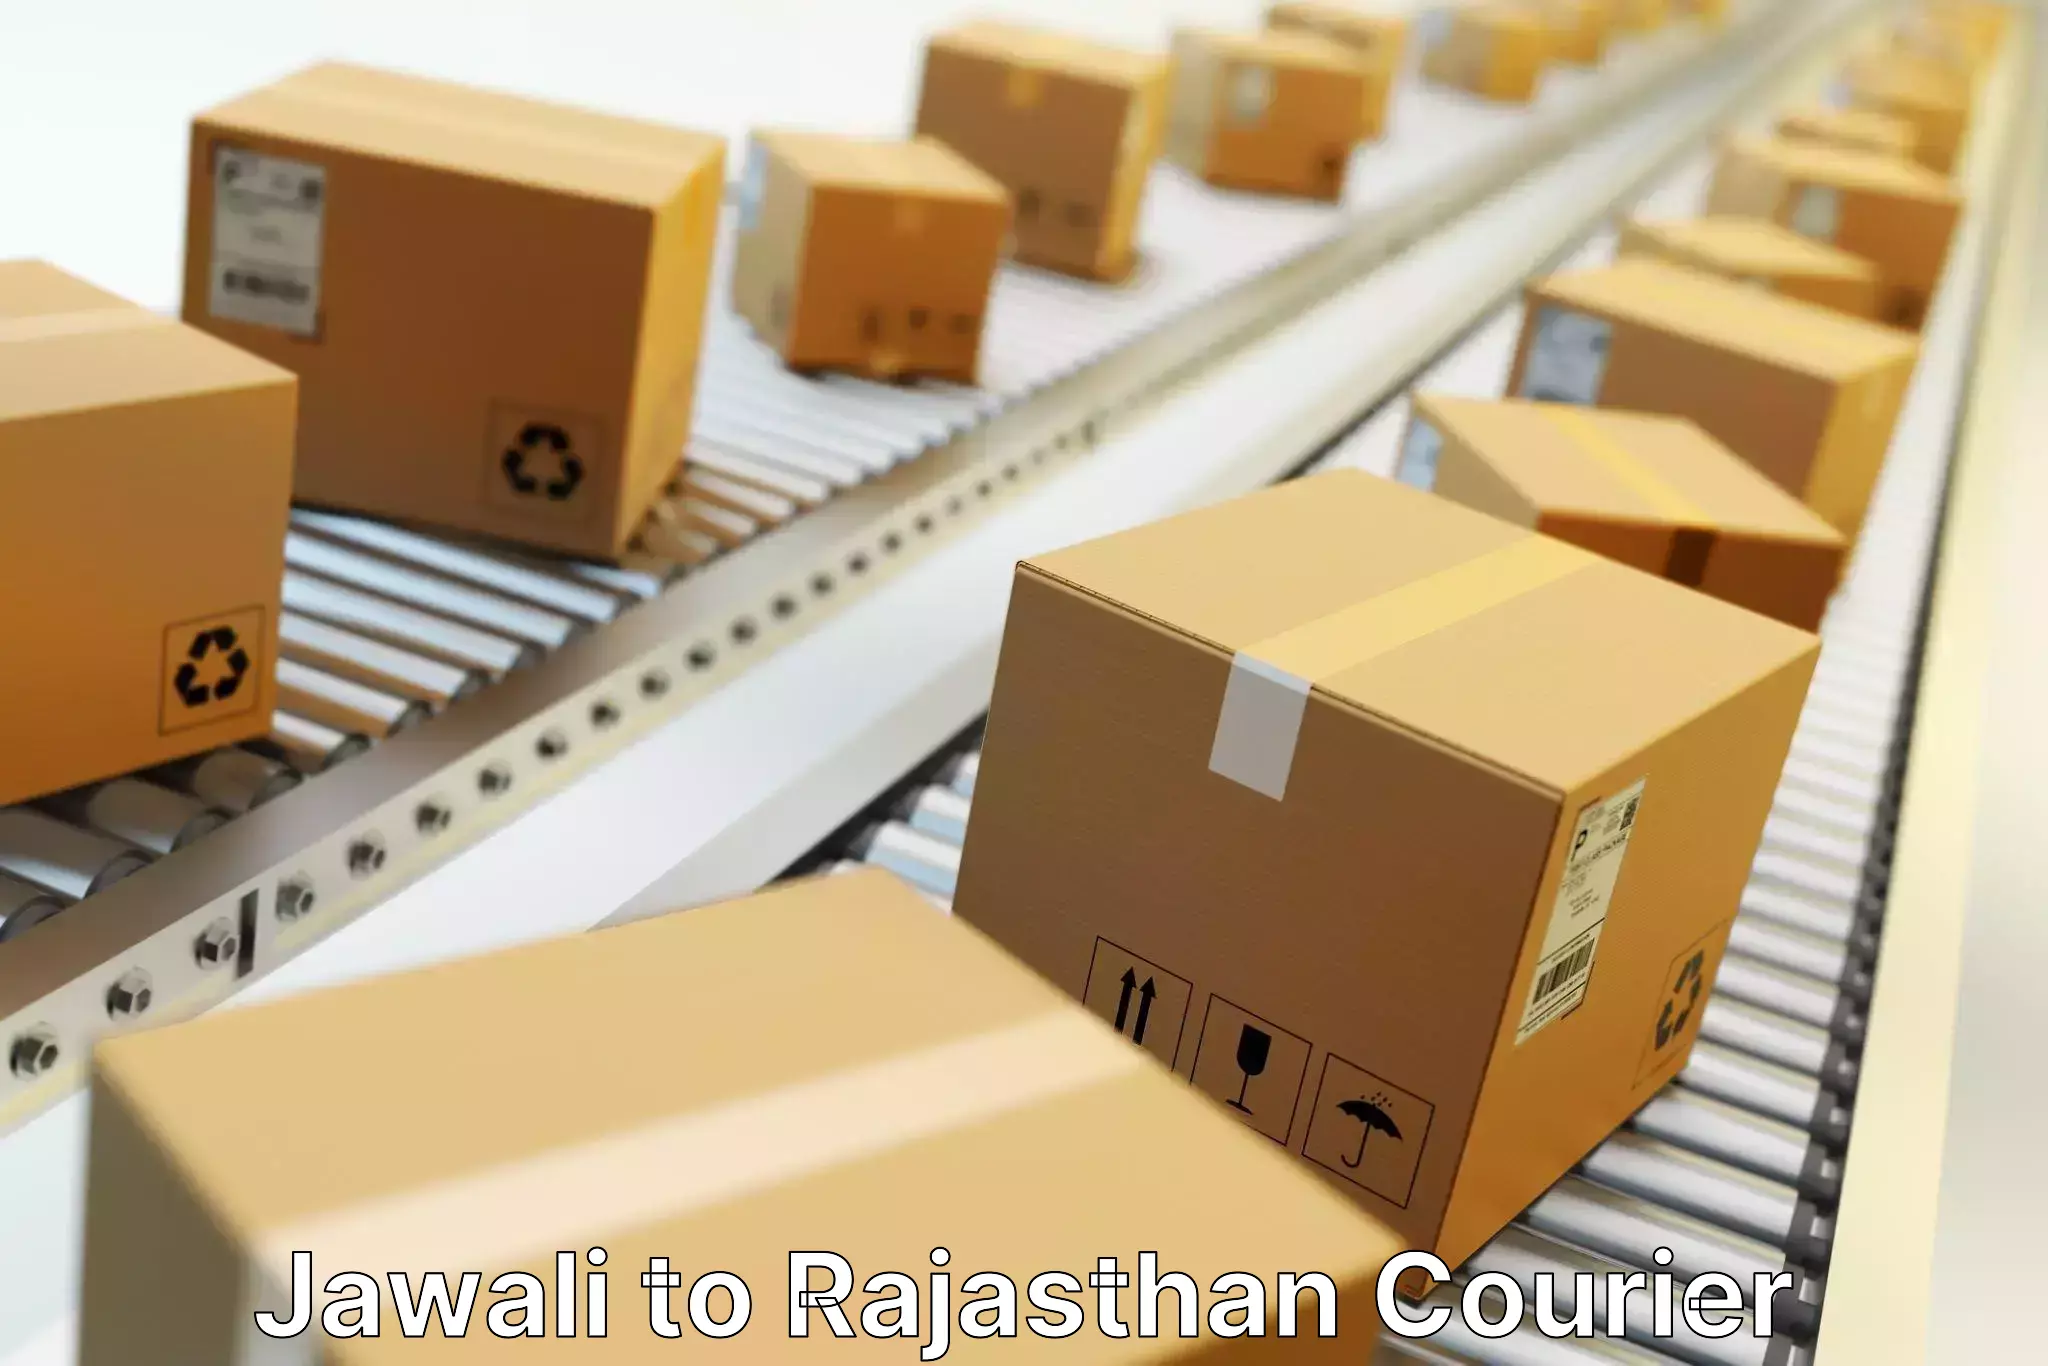 Courier rate comparison in Jawali to Ajmer